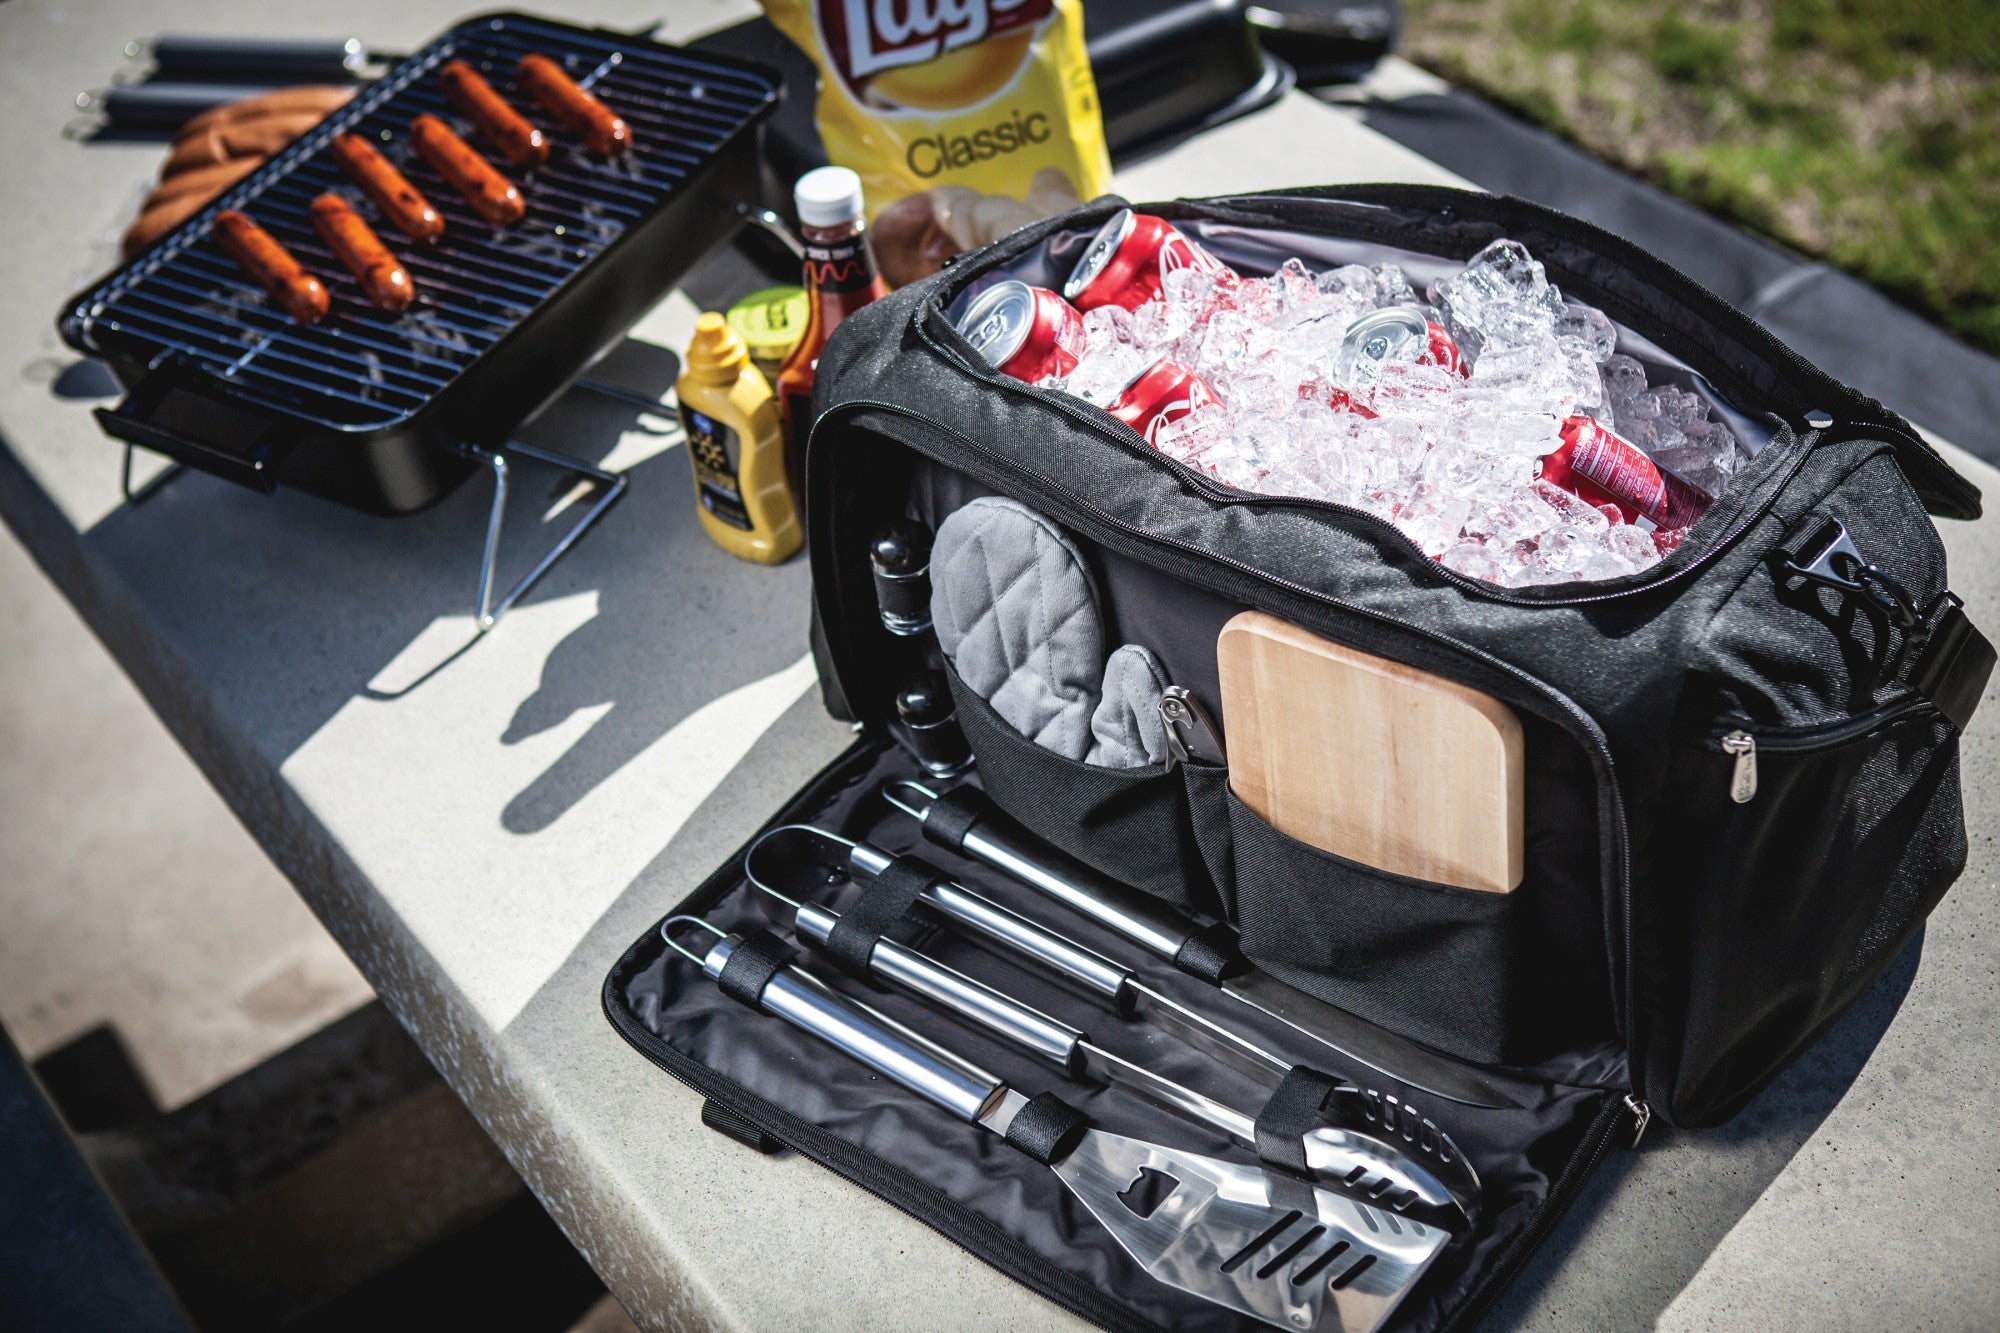 Penn State Nittany Lions - BBQ Kit Grill Set & Cooler